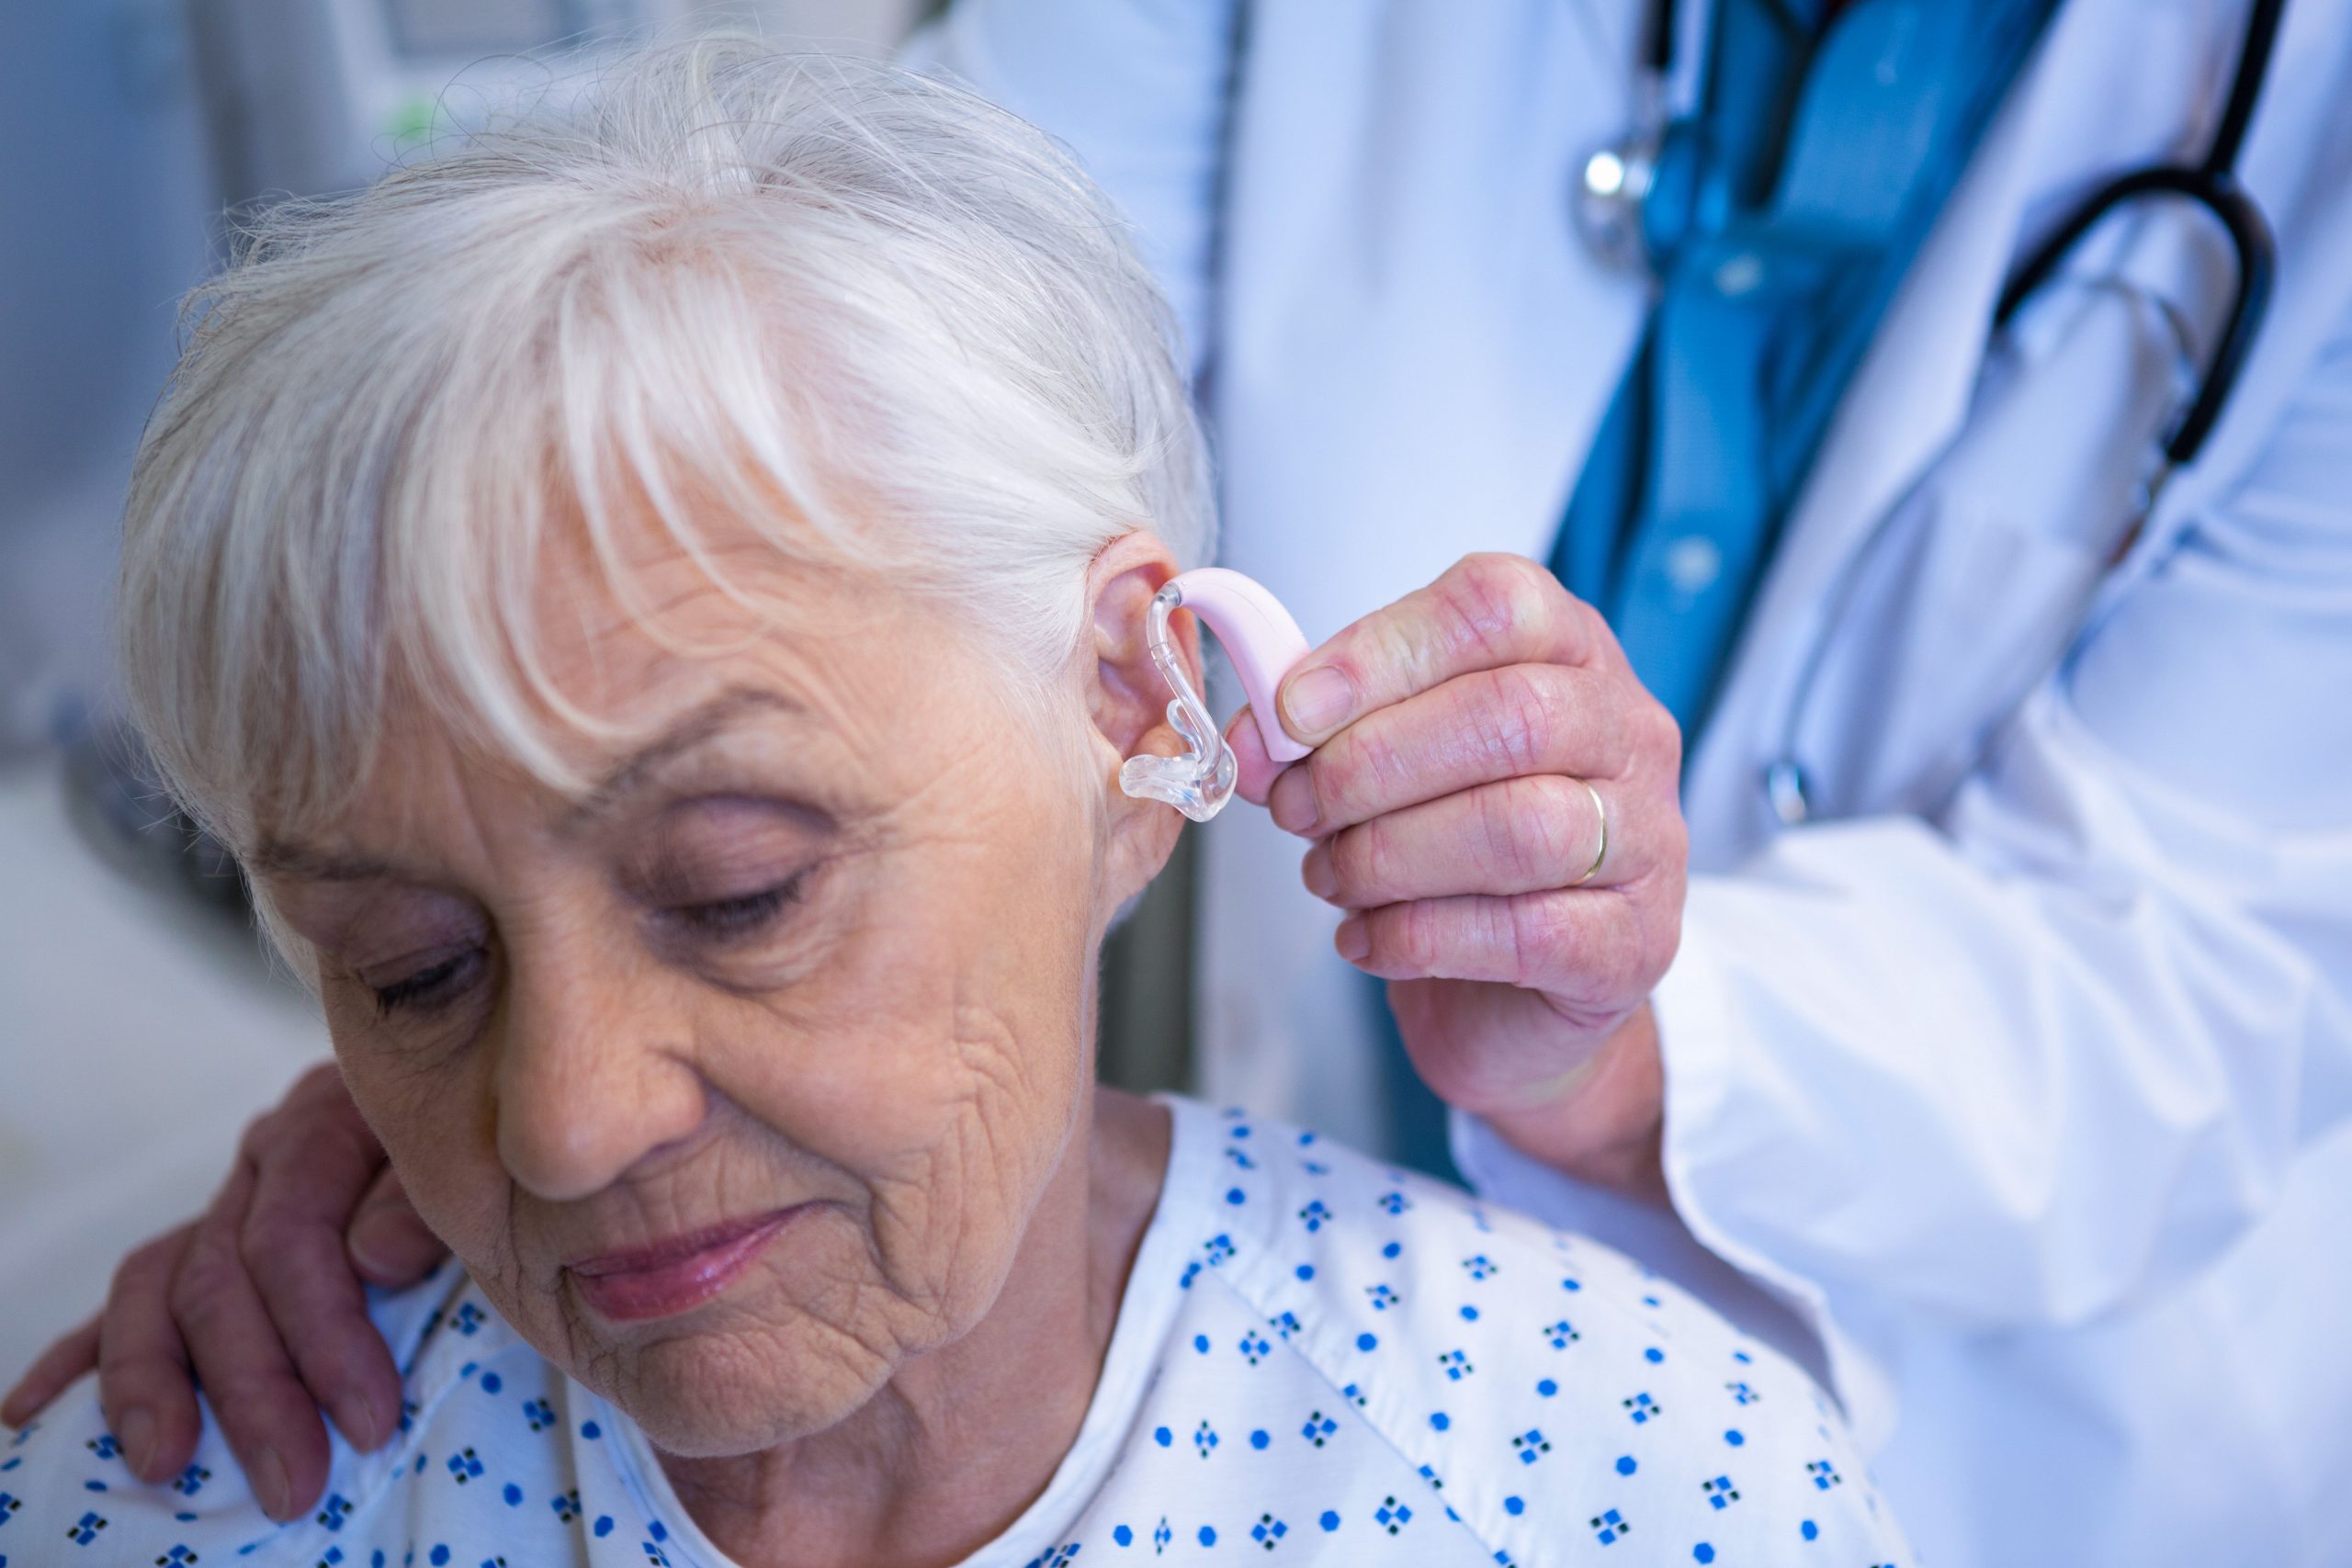 Doctor inserting hearing aid in senior patient ear Photo ...